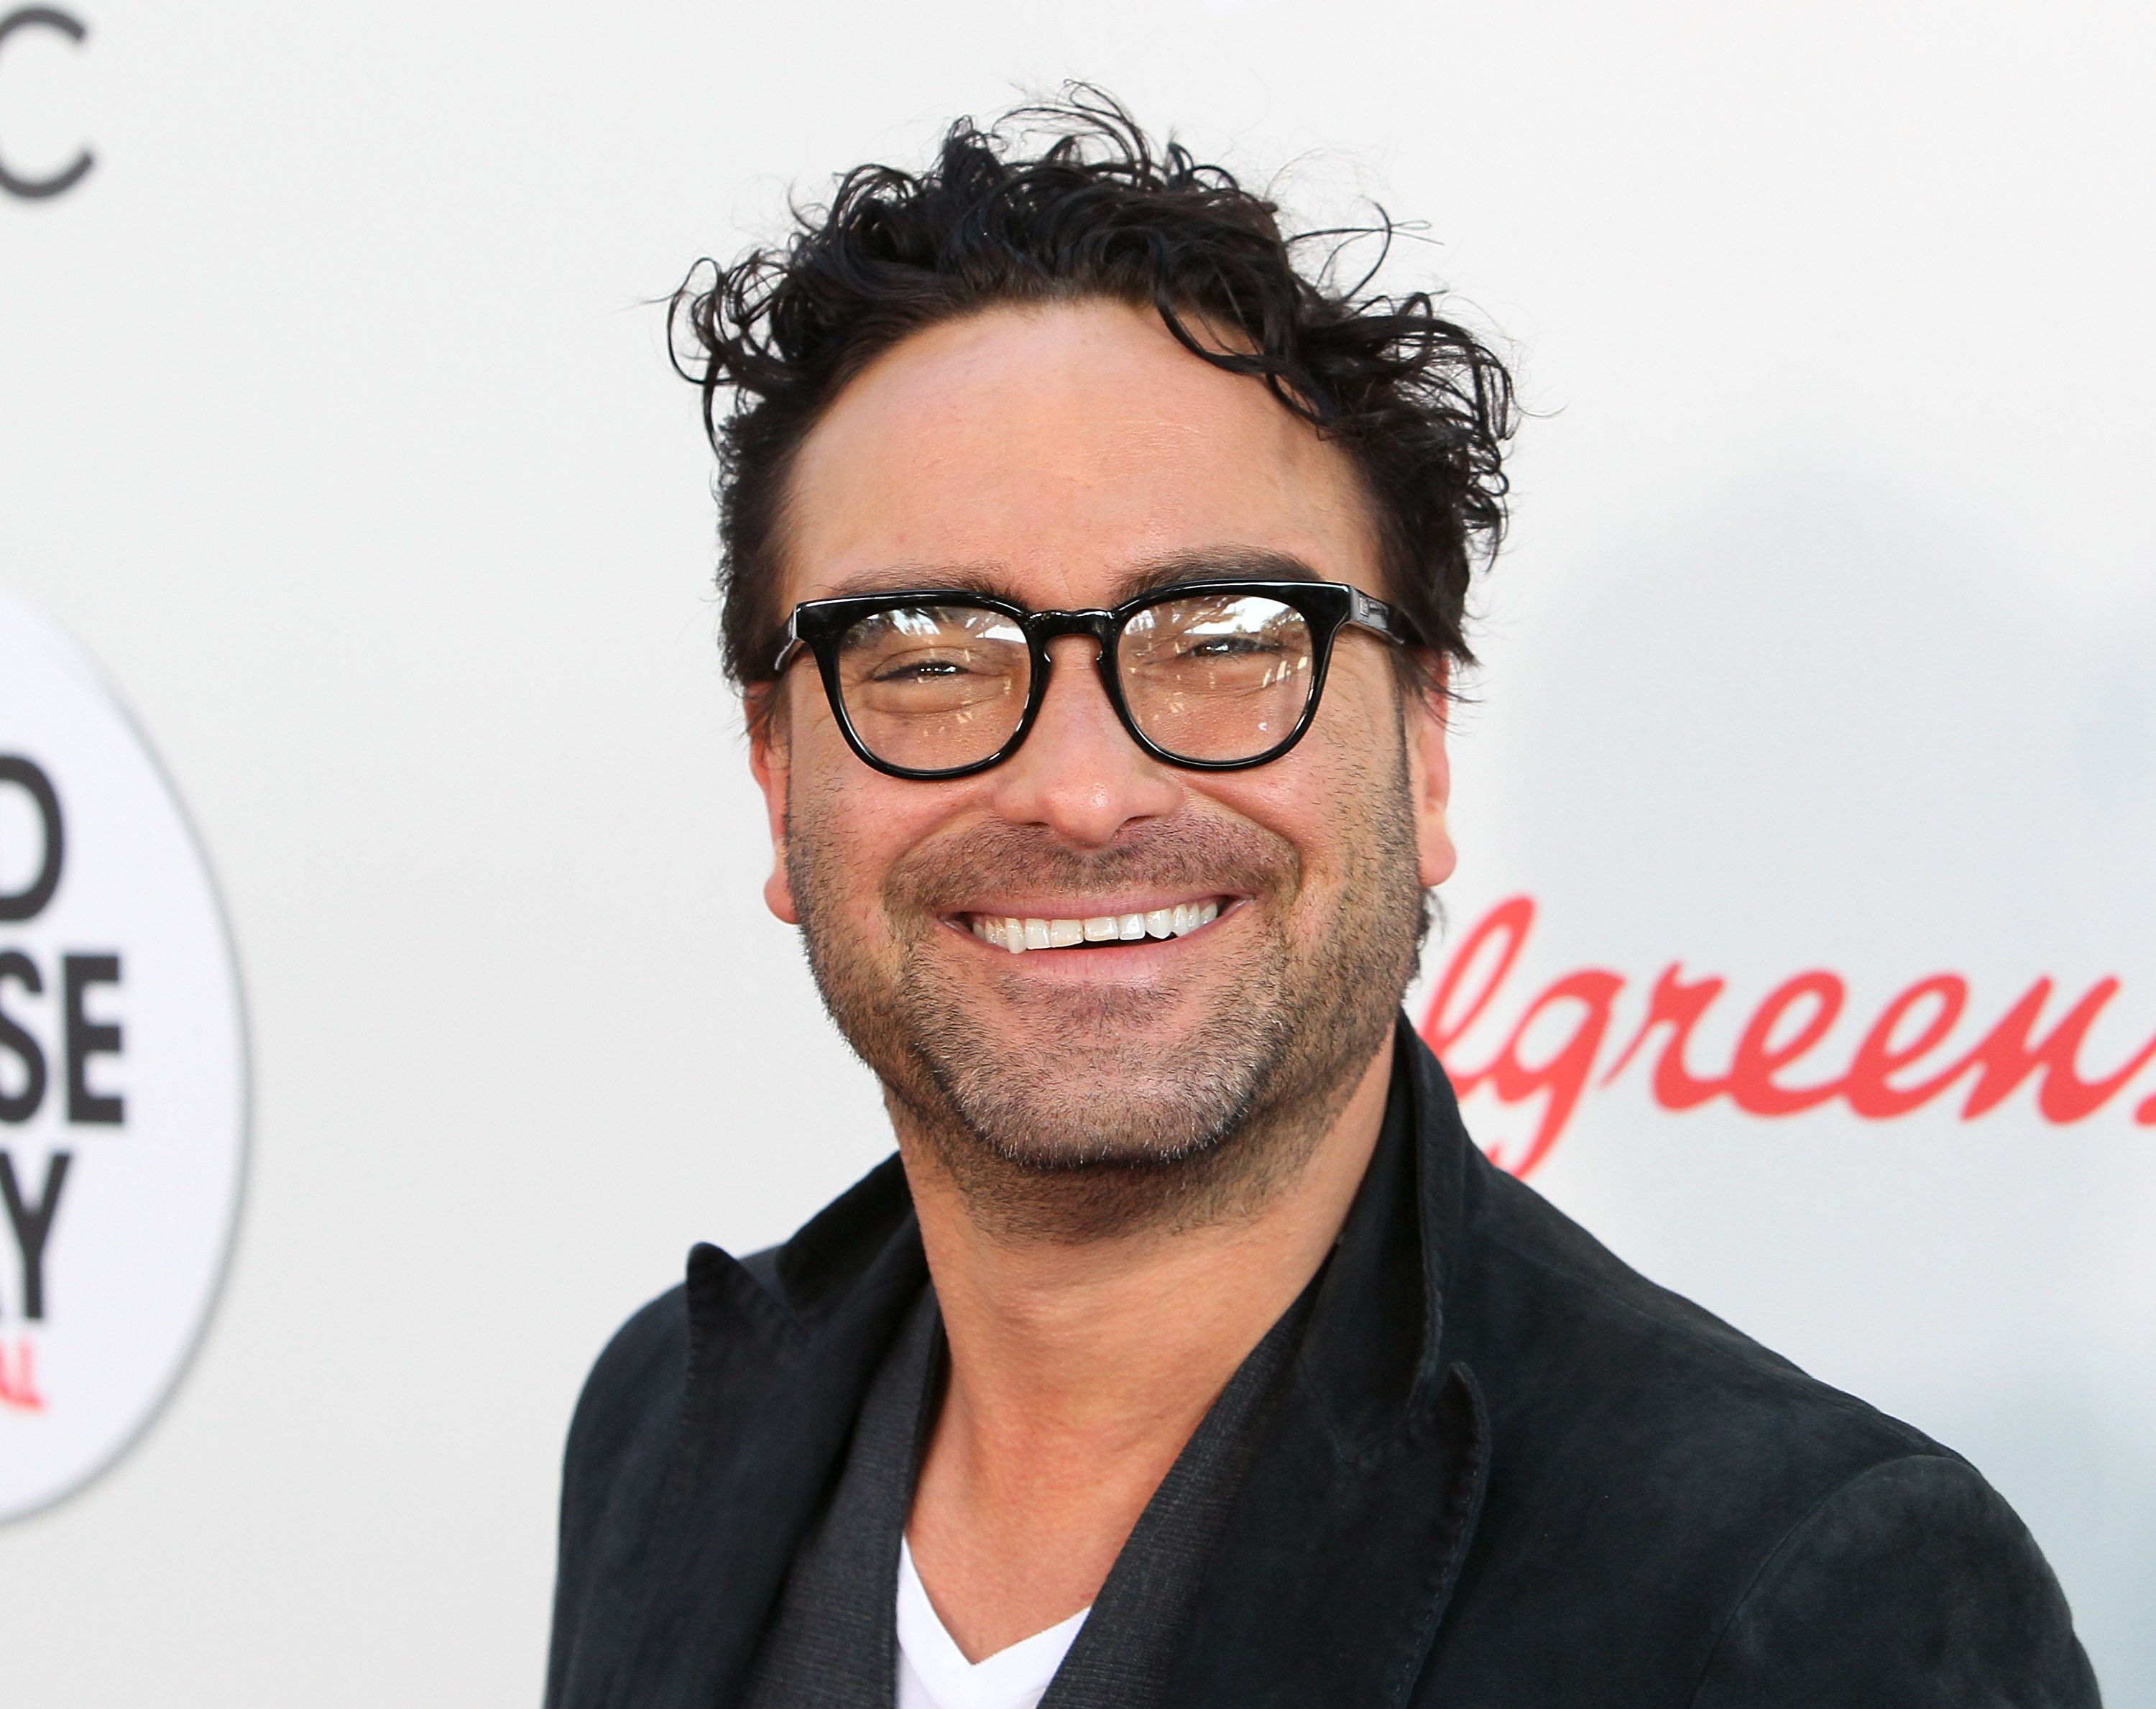 Johnny Galecki am Alfred Hitchcock Theater an den Universal Studios am 26. Mai 2016 in Universal City, Kalifornien. | Quelle: Getty Images